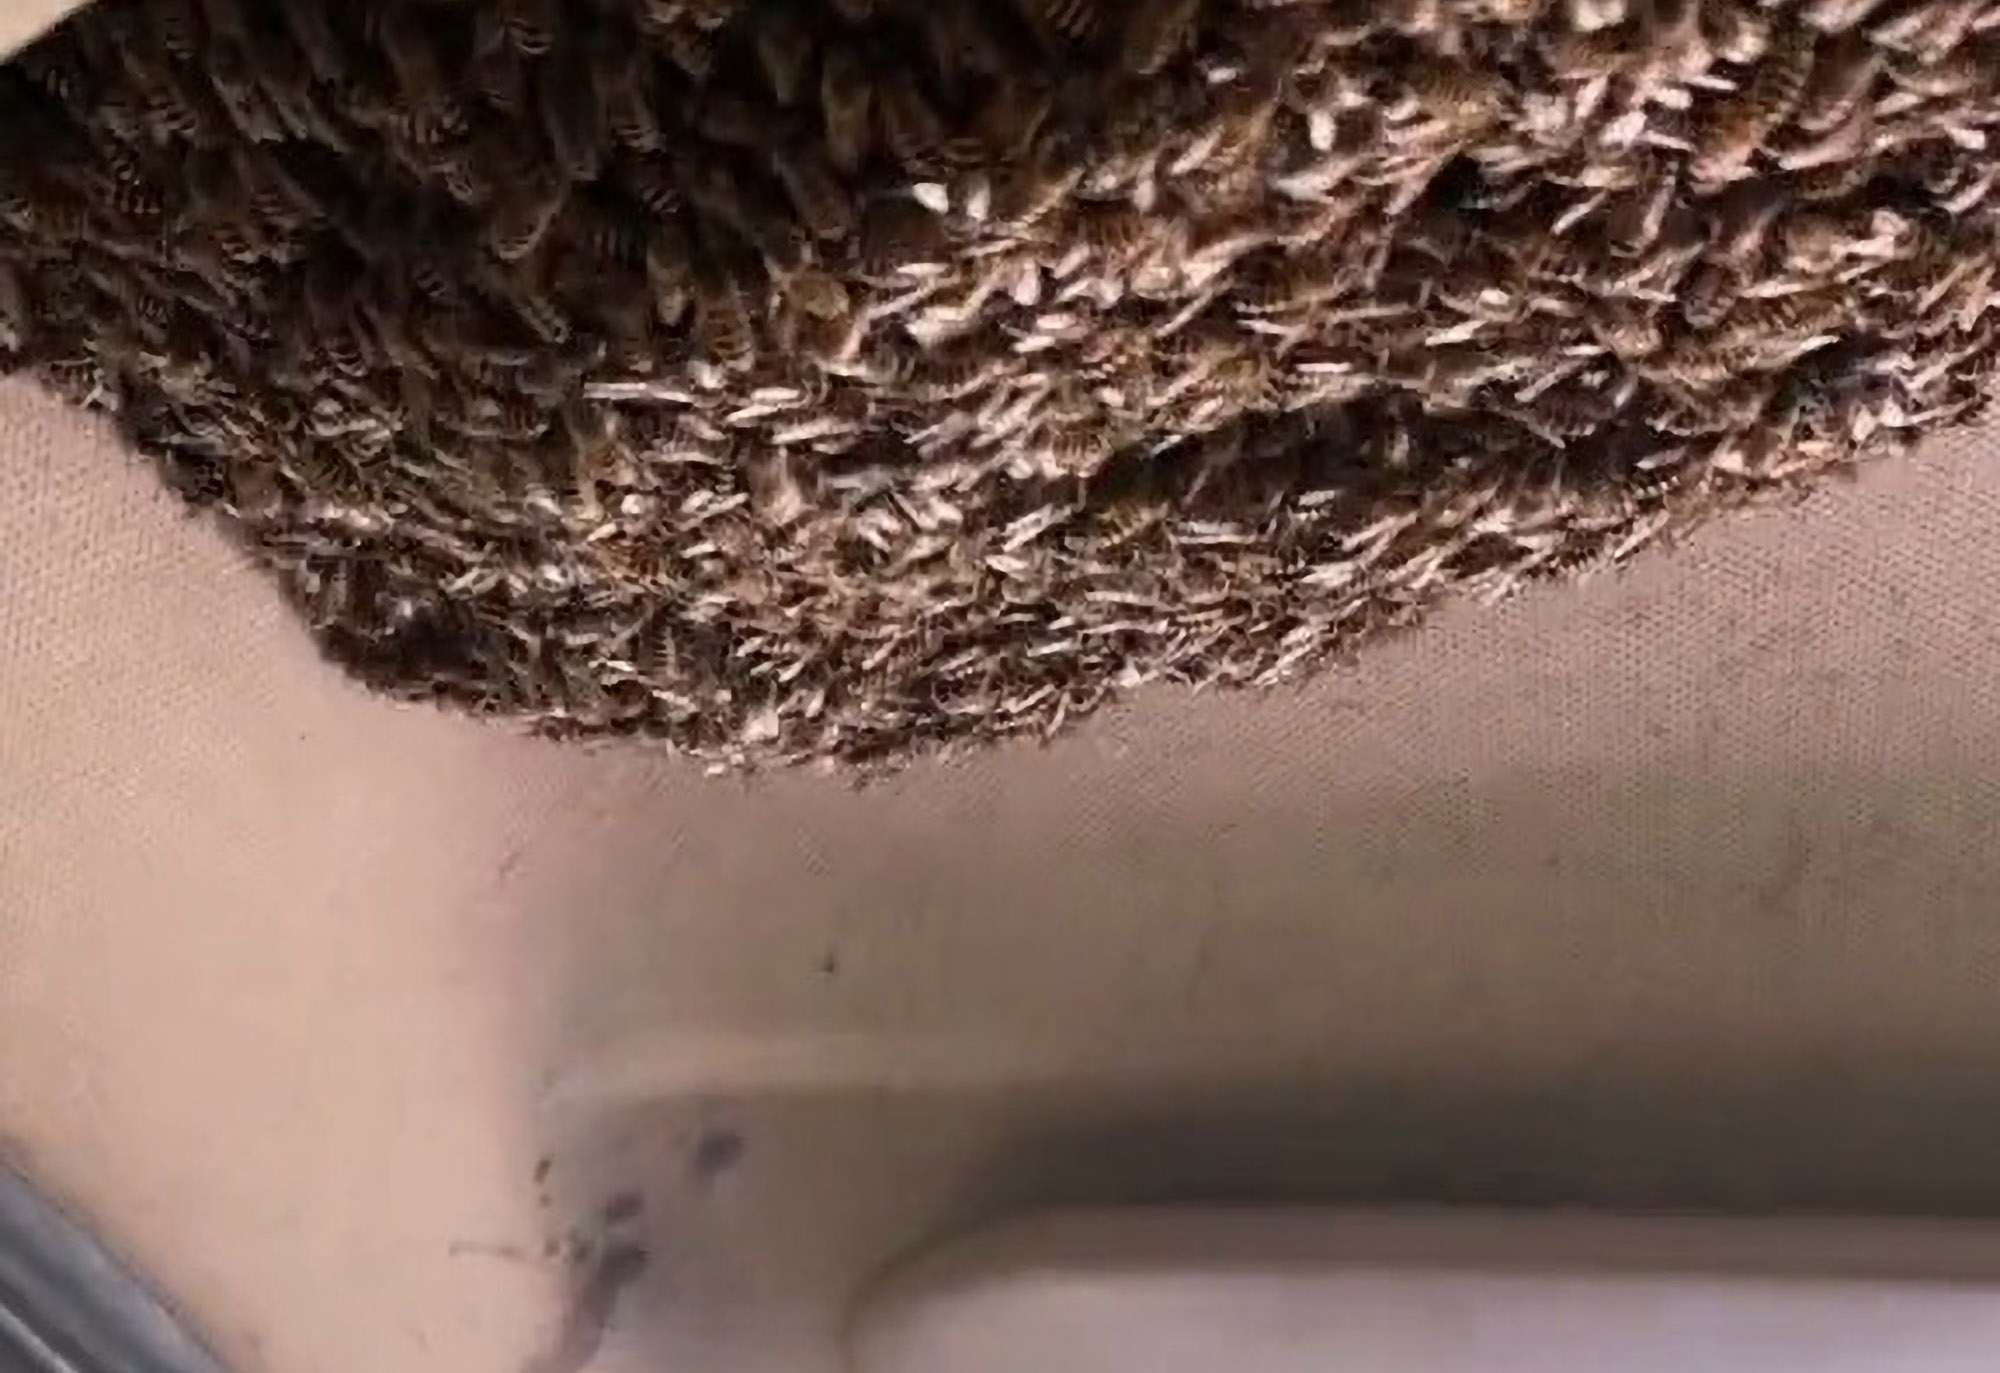 Swarm In Car Clip Could Be Staged,…